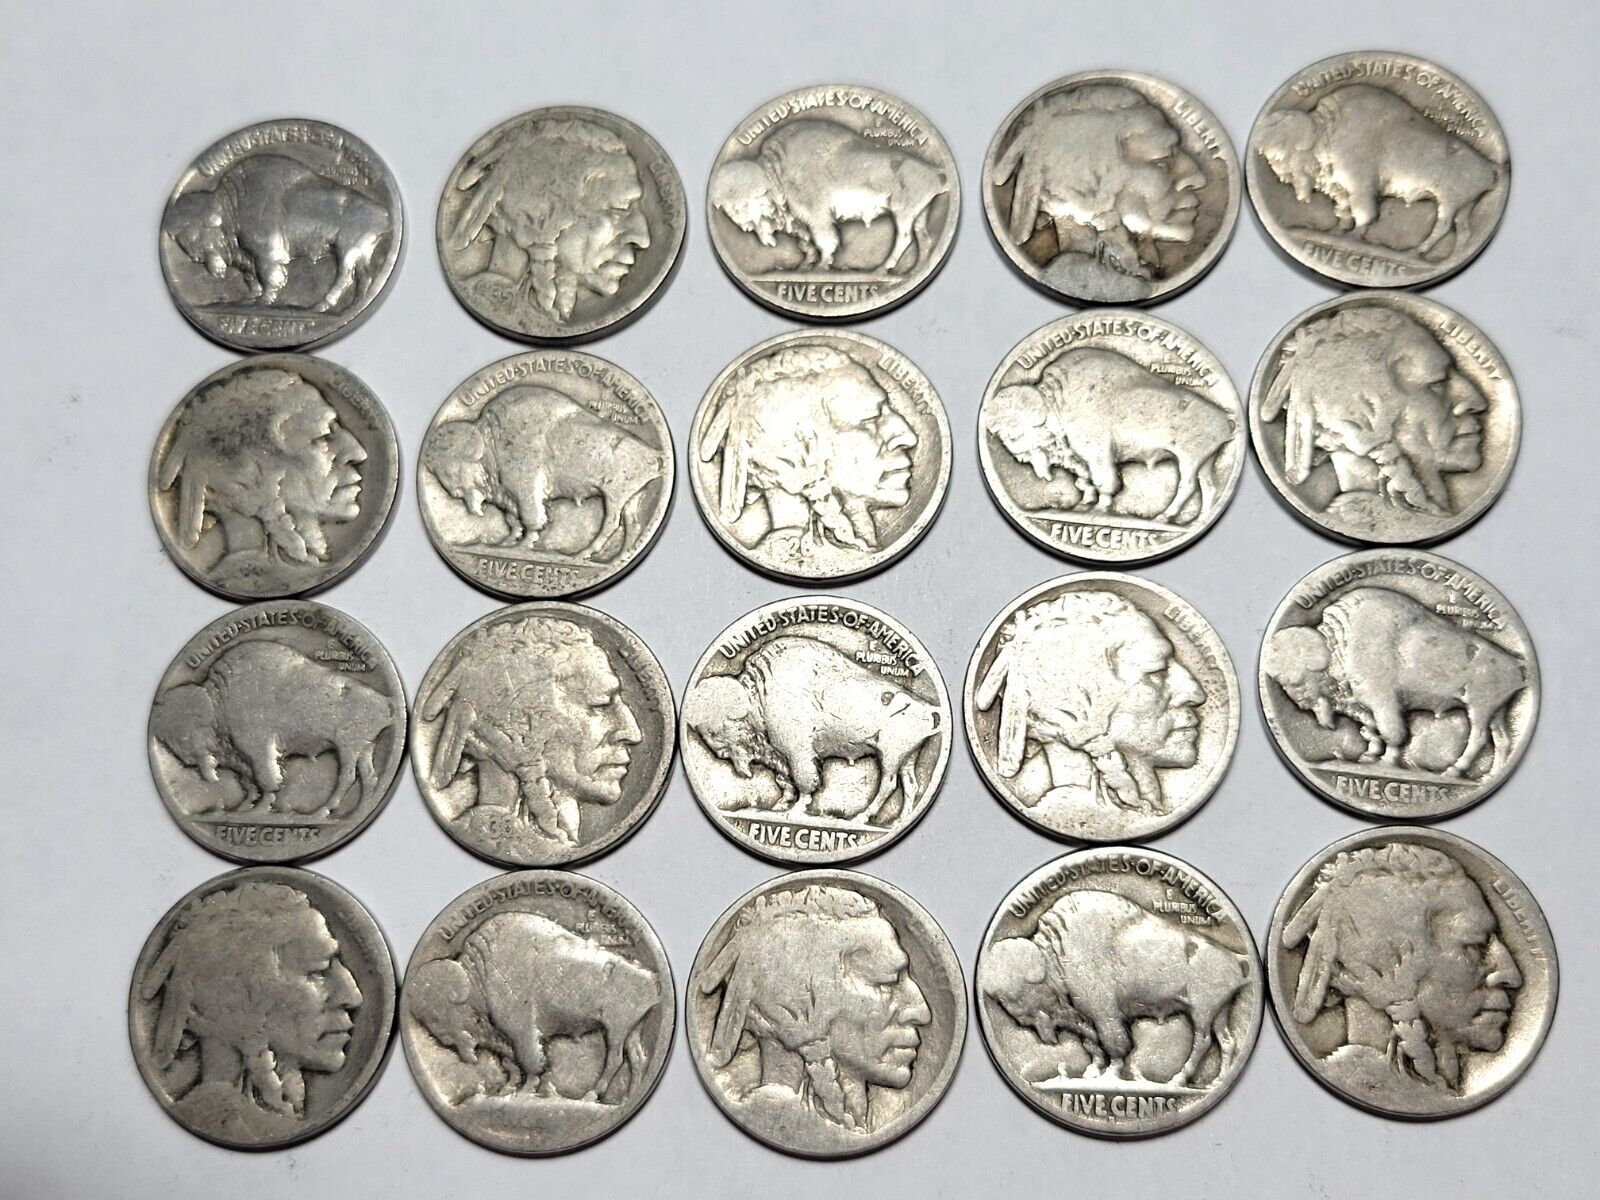 VINTAGE Coin Lot of 20 Buffalo Nickels 1913-1938 Dateless 